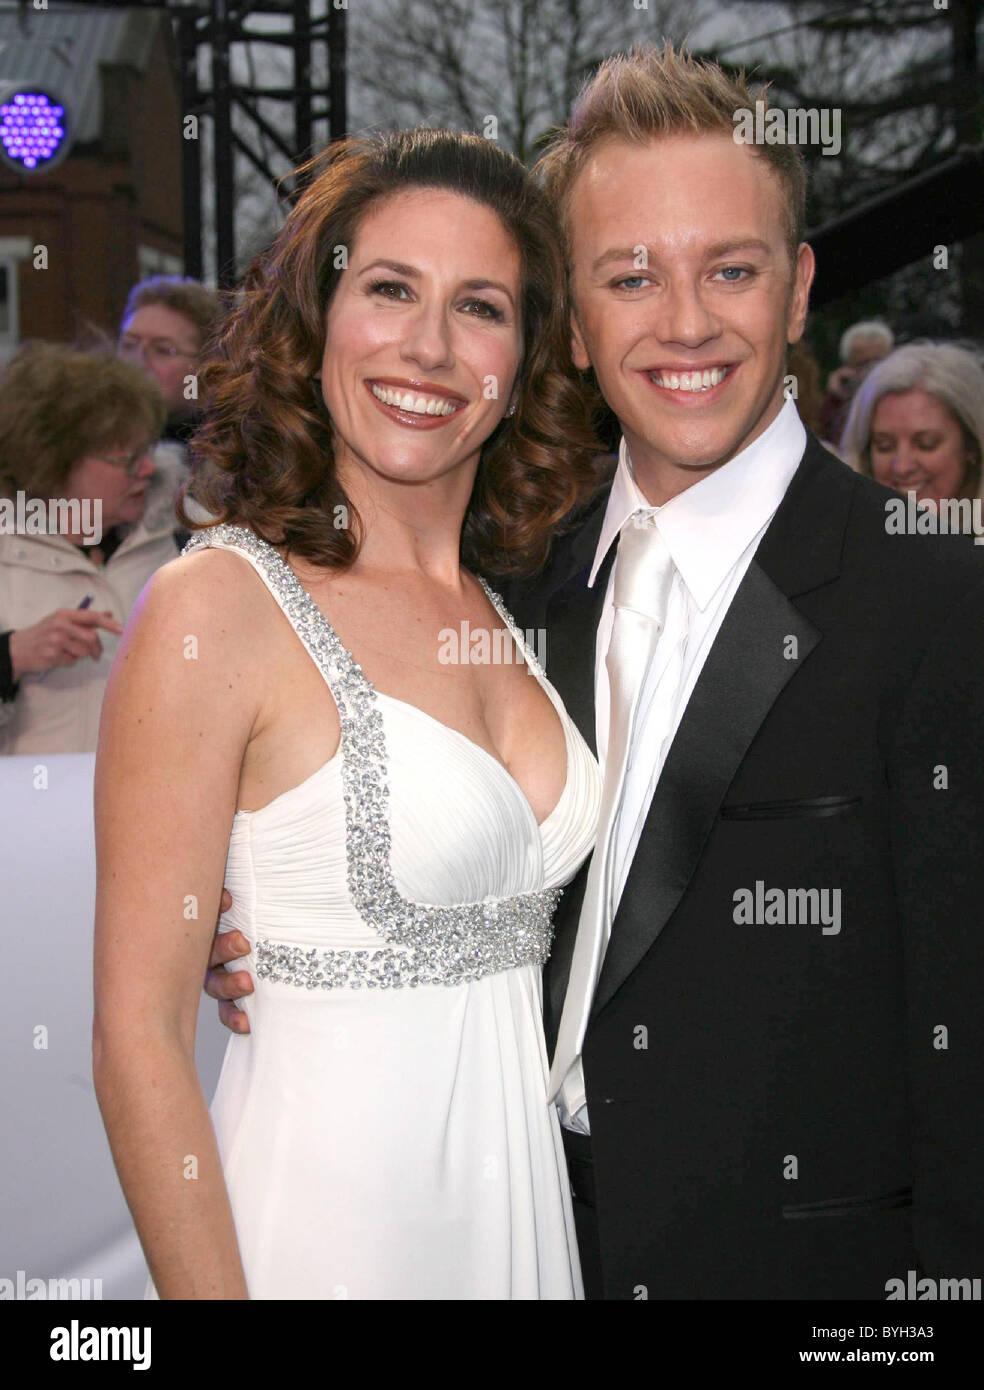 Gaynor Faye and Daniel Whiston 'Champion Of Champions' Dancing On Ice finale at Elstree Studios - Arrivals Borehamwood, England Stock Photo